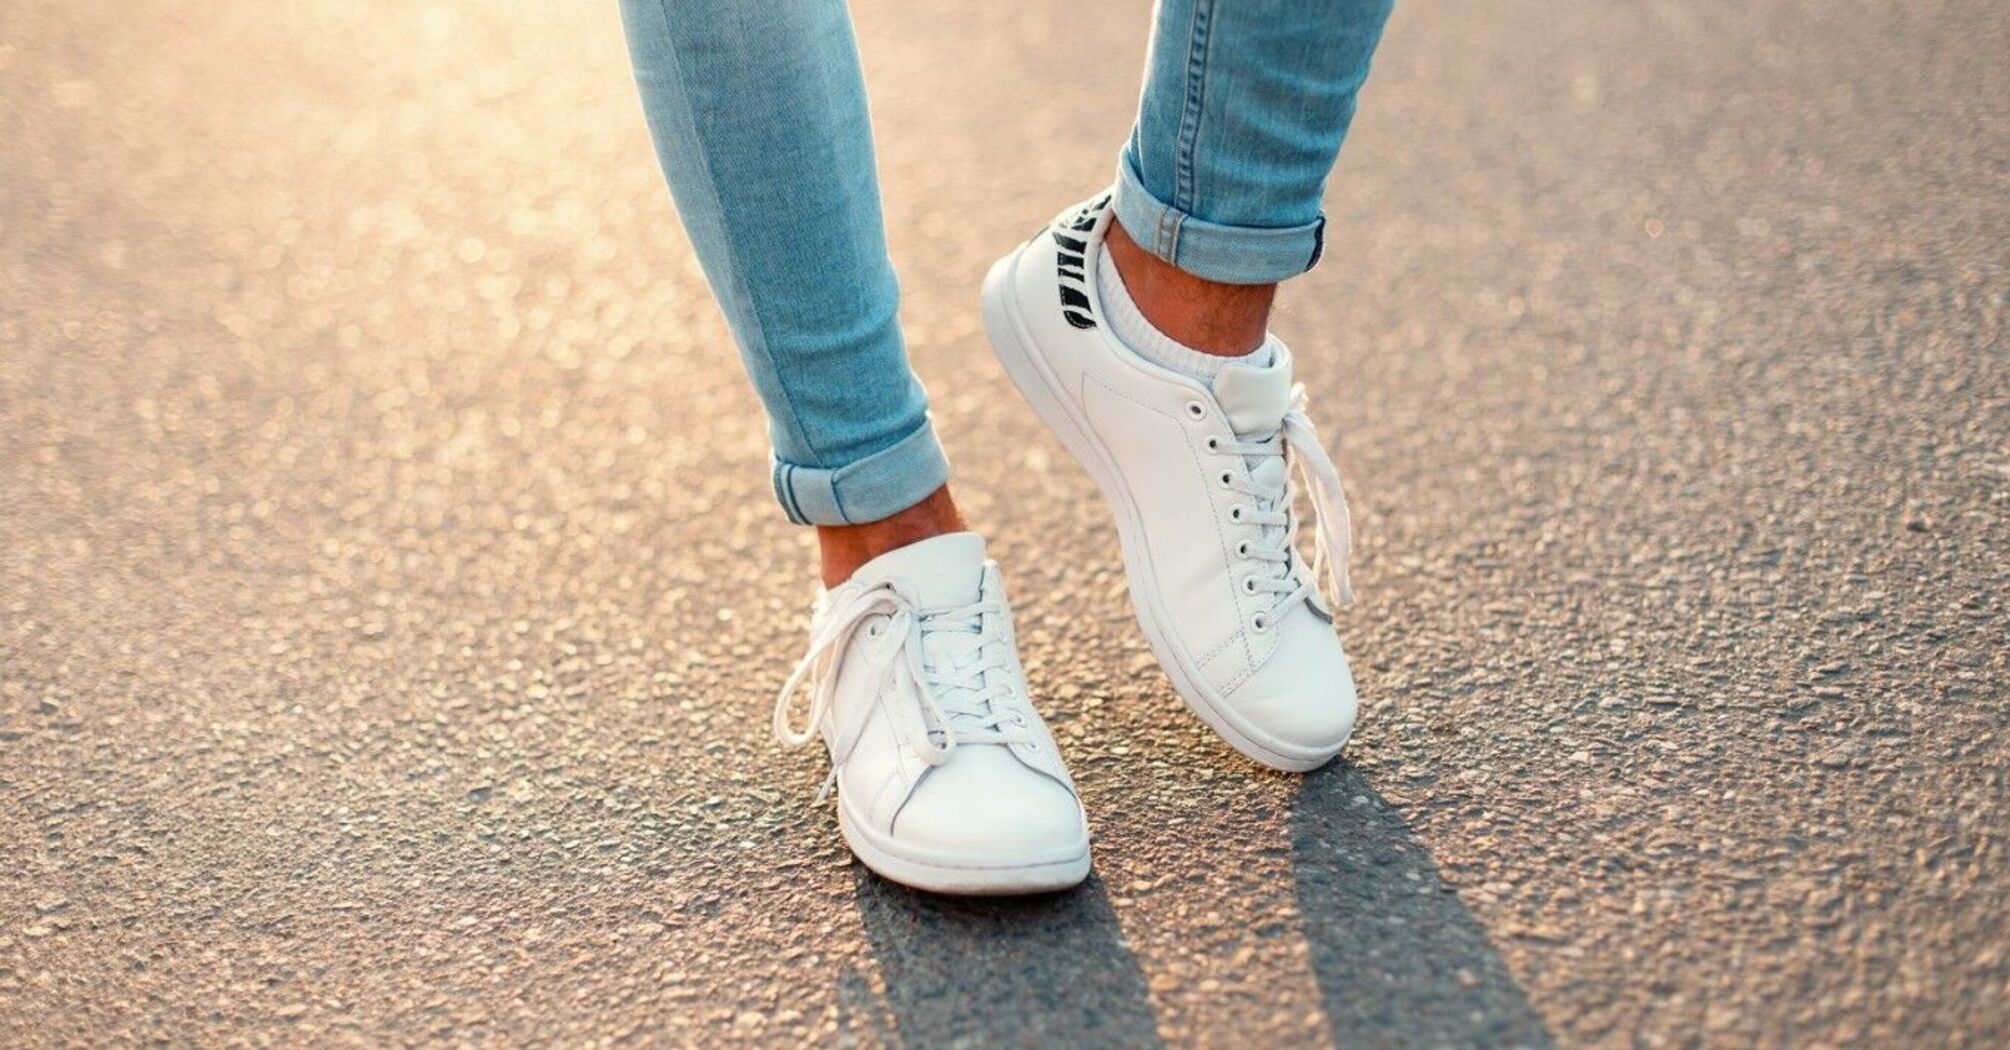 How to care for white sneakers